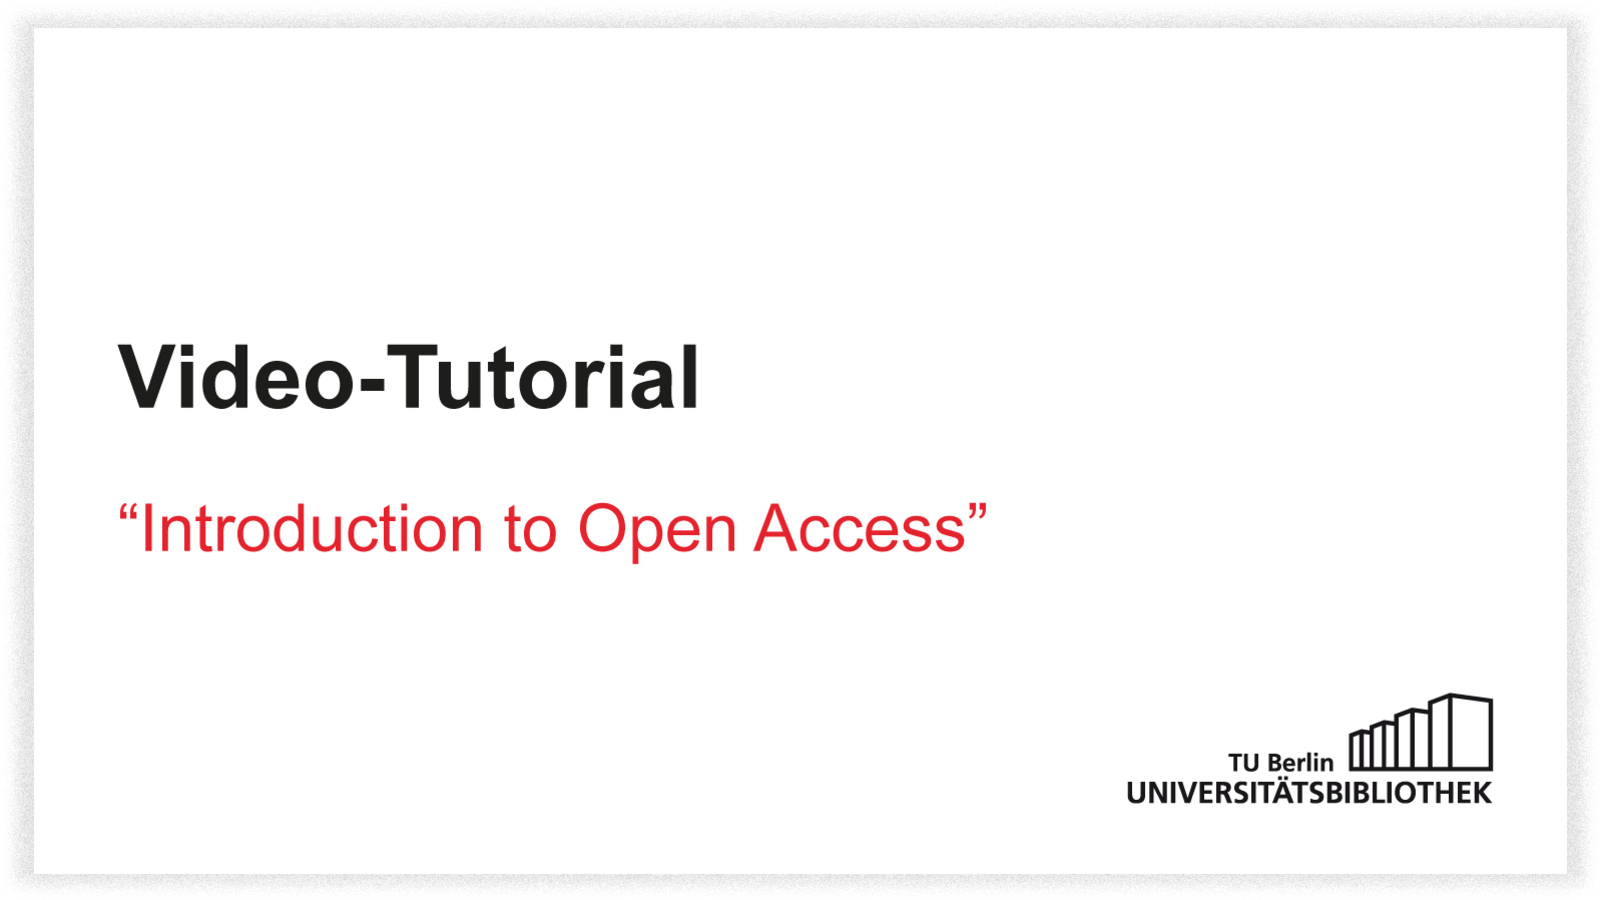 Video-Tutorial: Introduction to Open Access, englisch only